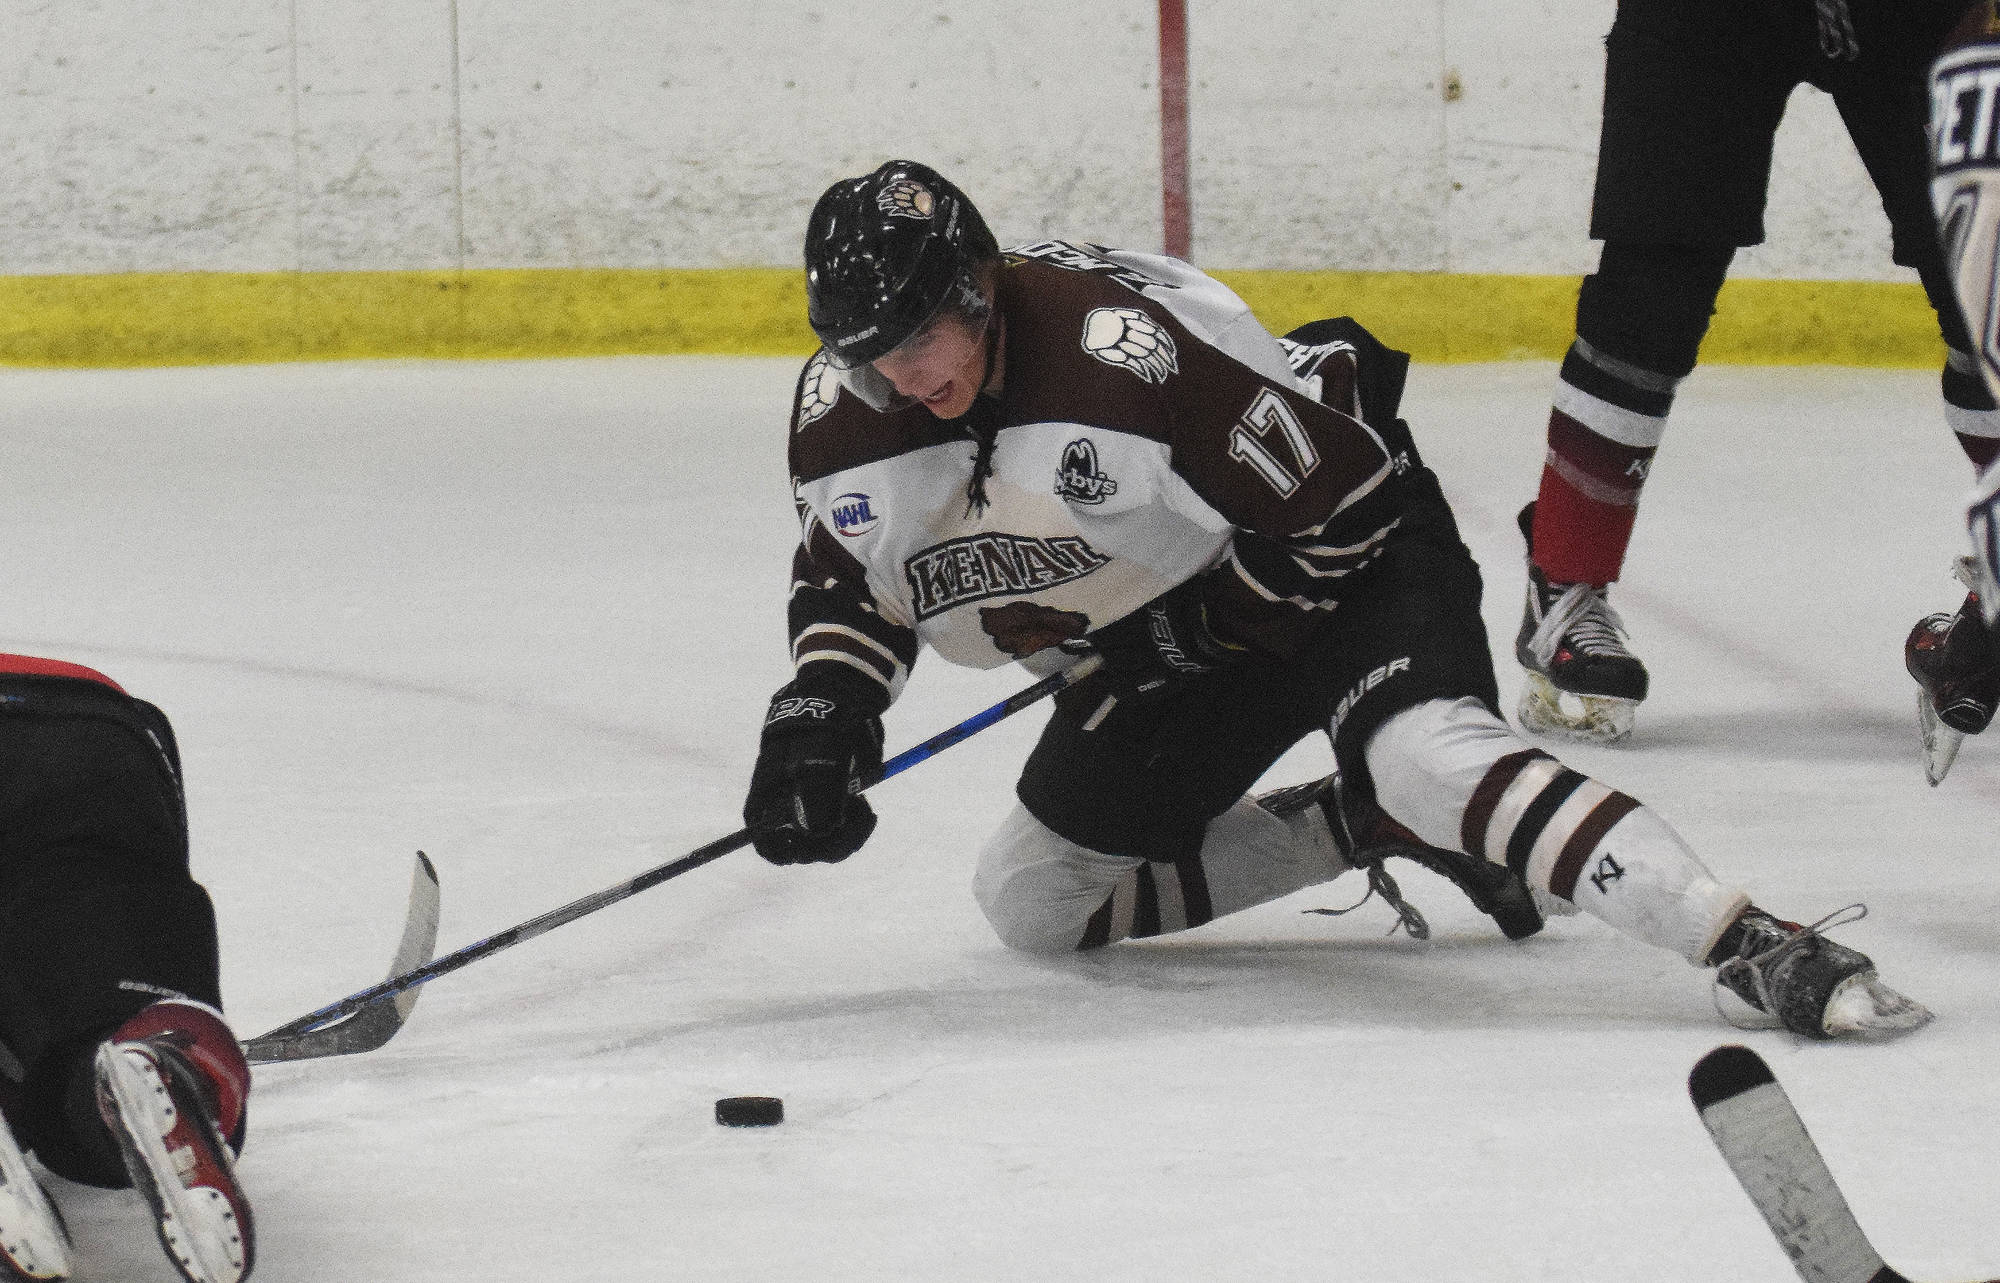 Kenai River Brown Bears forward Sutton McDonald eyes the puck in front of a Minnesota player Friday night at the Soldotna Regional Sports Complex. (Photo by Joey Klecka/Peninsula Clarion)